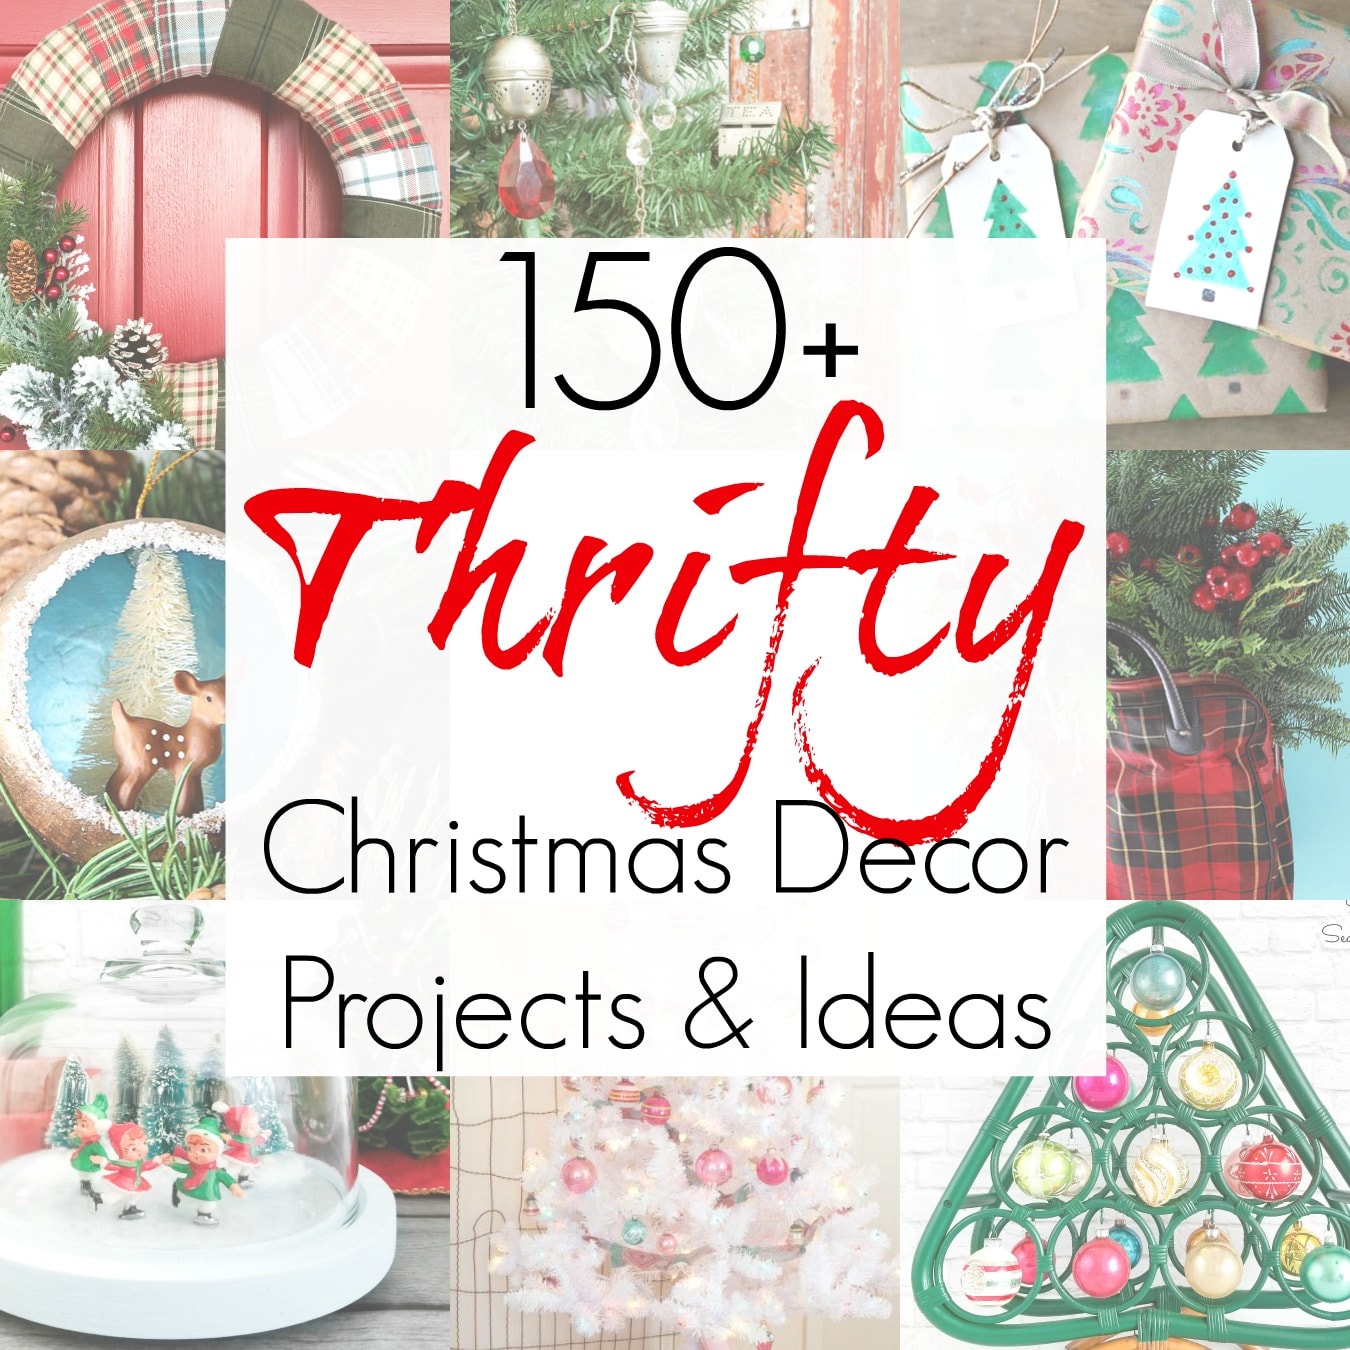 https://www.sadieseasongoods.com/wp-content/uploads/2020/11/thrifty-christmas-decor-with-projects-and-ideas.jpg